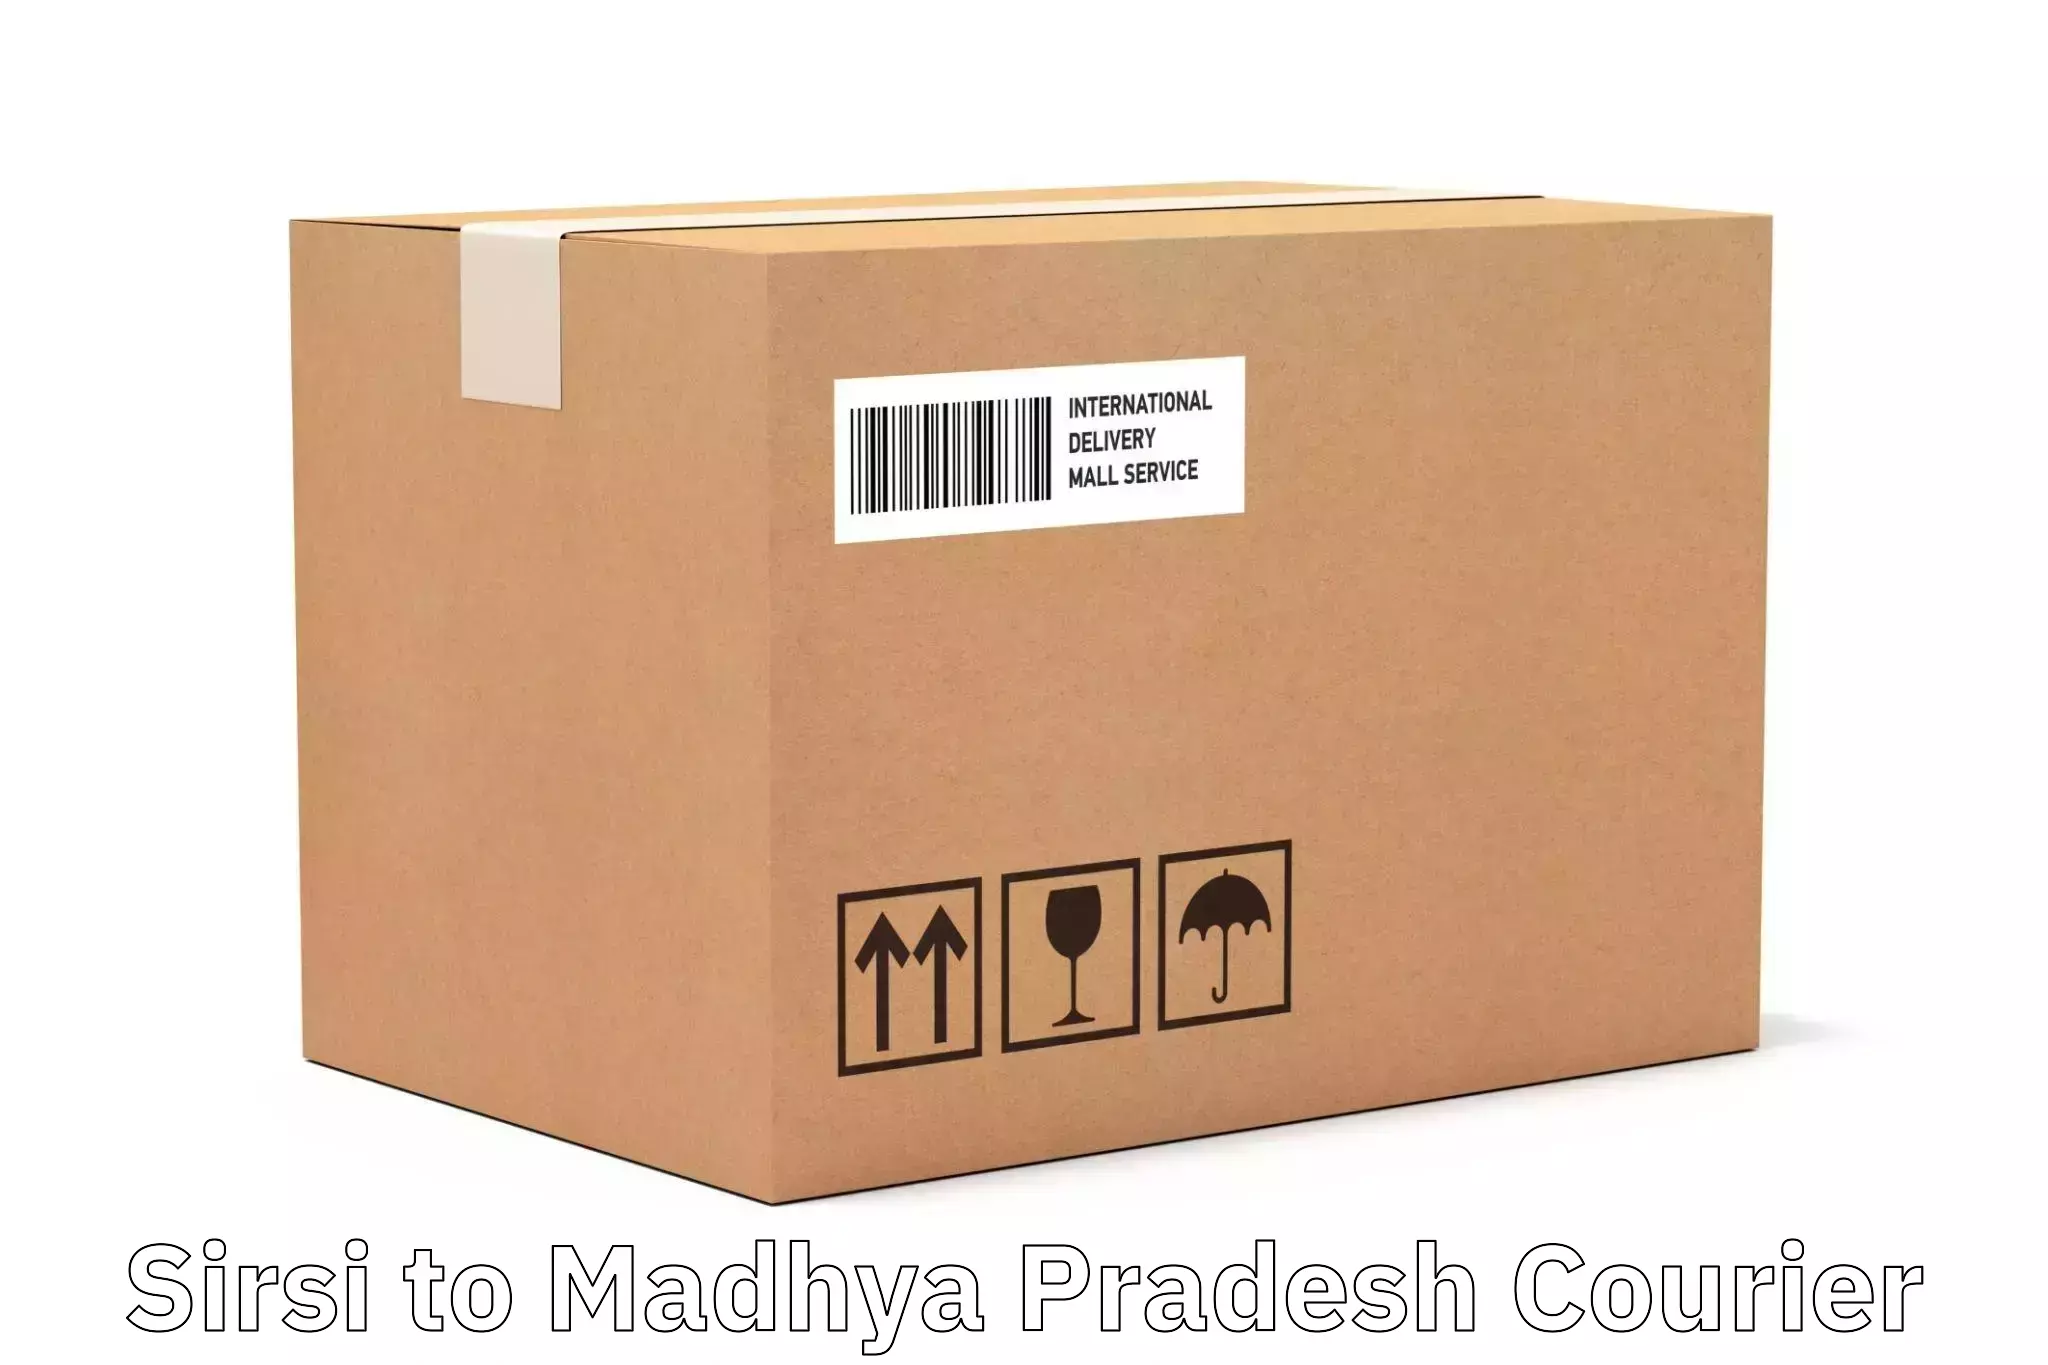 Custom courier packaging Sirsi to Manawar